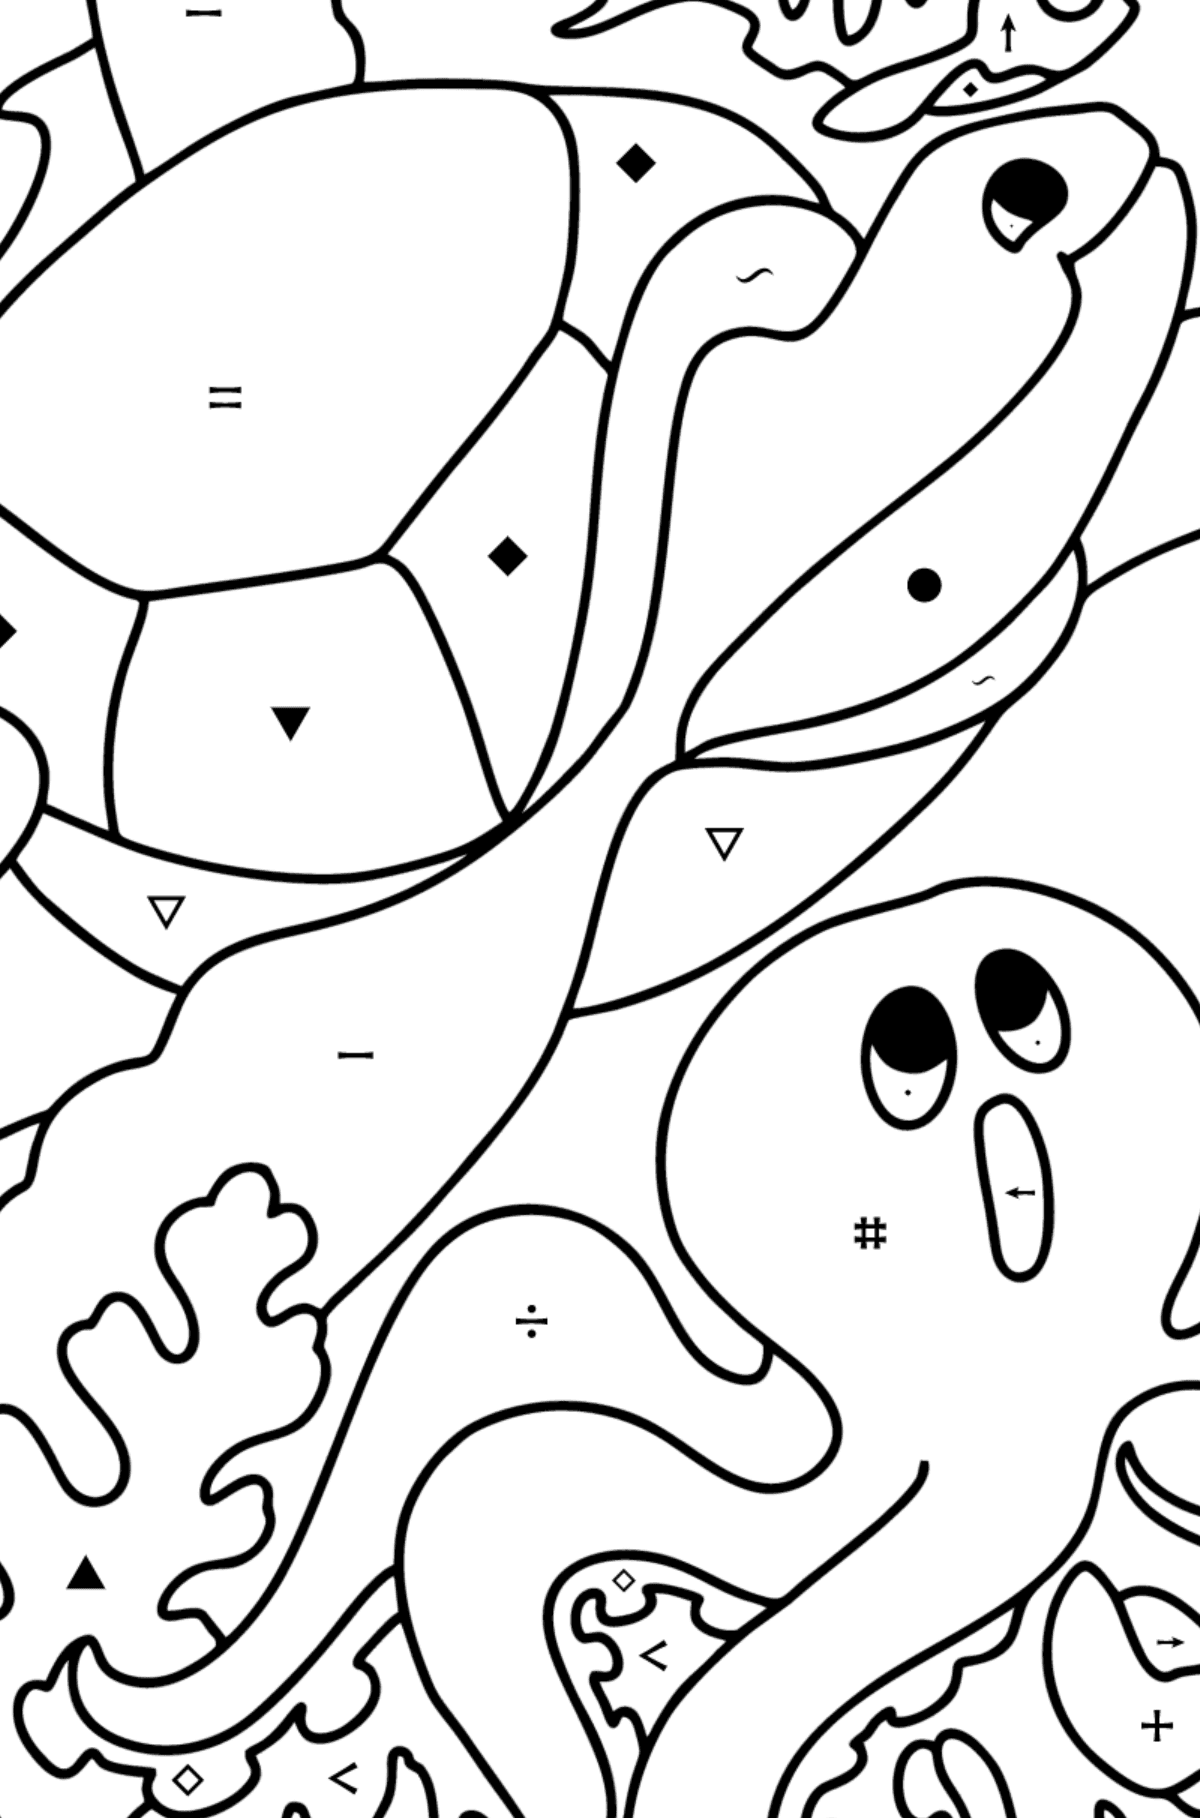 Fish, Turtle, Crab and Octopus coloring page - Coloring by Symbols for Kids